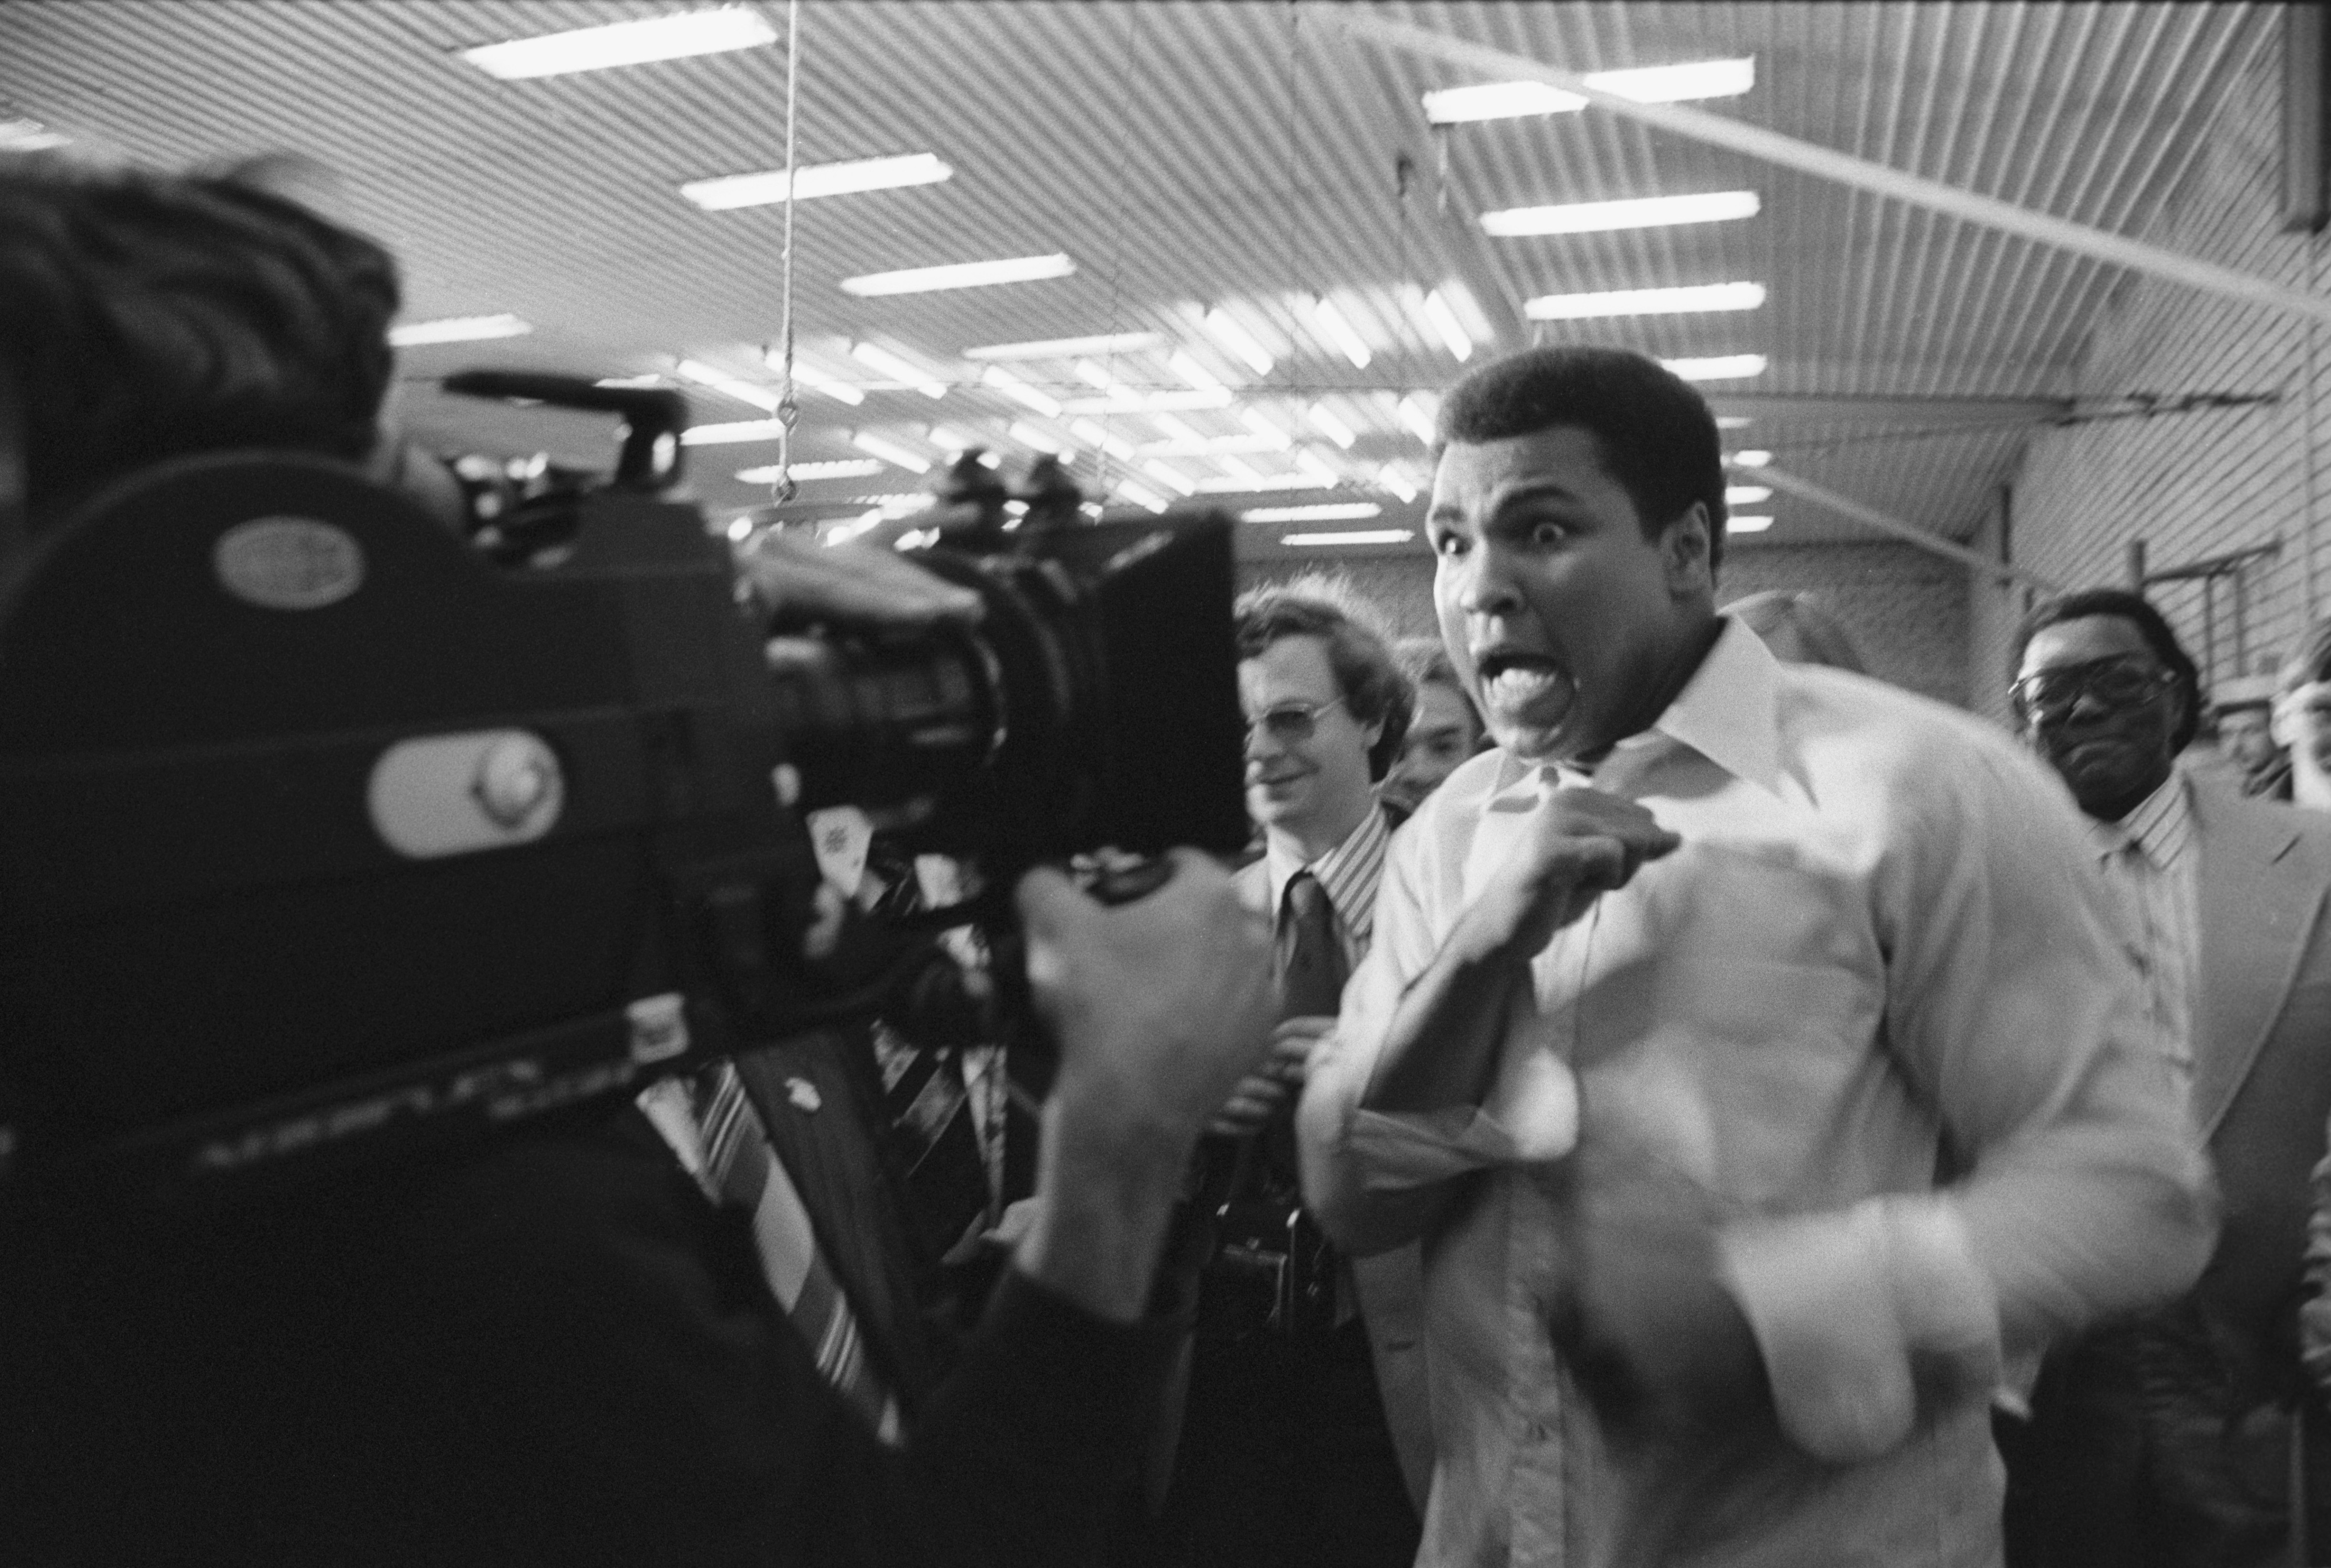 American legendary boxer Muhammad Ali (Cassius Marcellus Clay) visiting Moscow., Image: 86583435, License: Rights-managed, Restrictions: Vyat-K01_0320, Model Release: no, Credit line: Profimedia, Sputnik